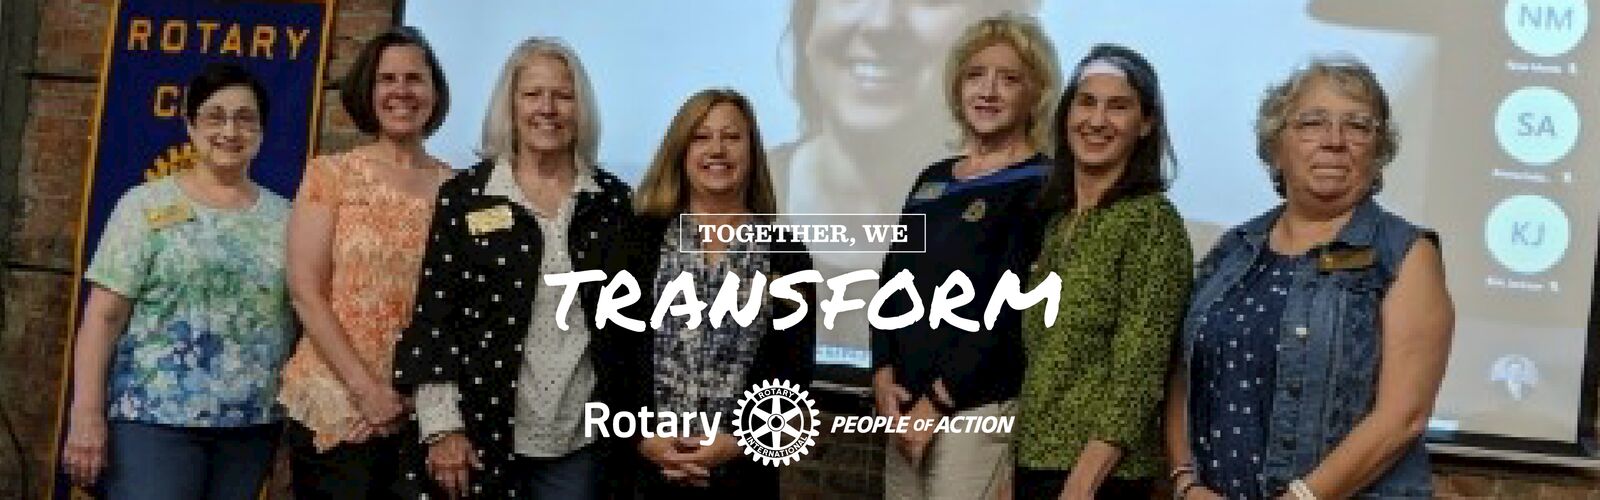 Rotary - People of Action. Together, we Transform